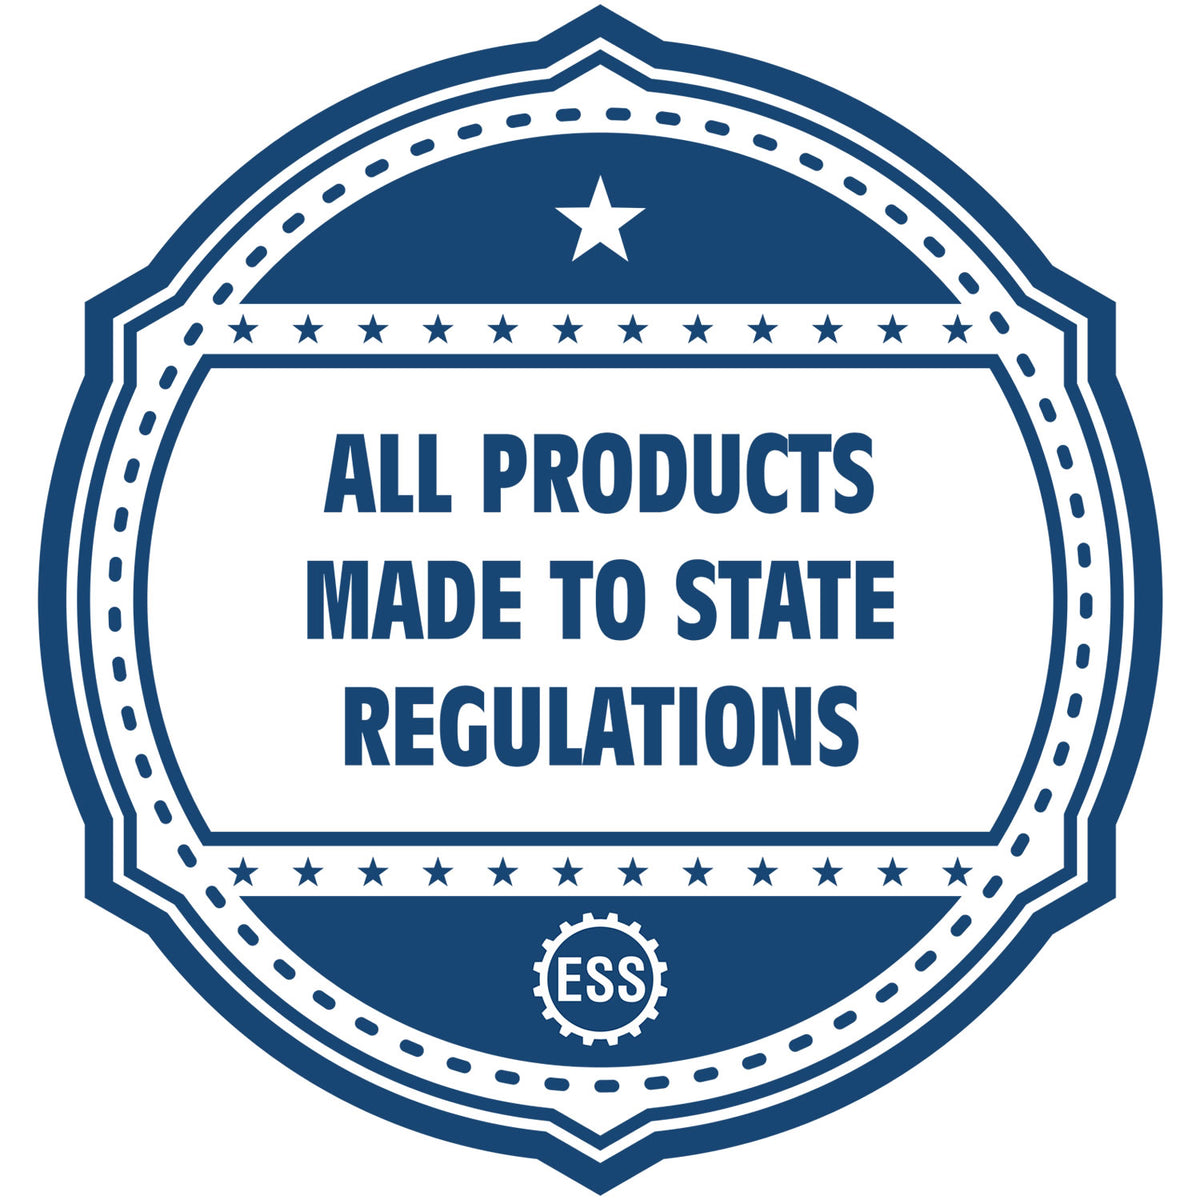 An icon or badge element for the Extended Long Reach Alabama Architect Seal Embosser showing that this product is made in compliance with state regulations.